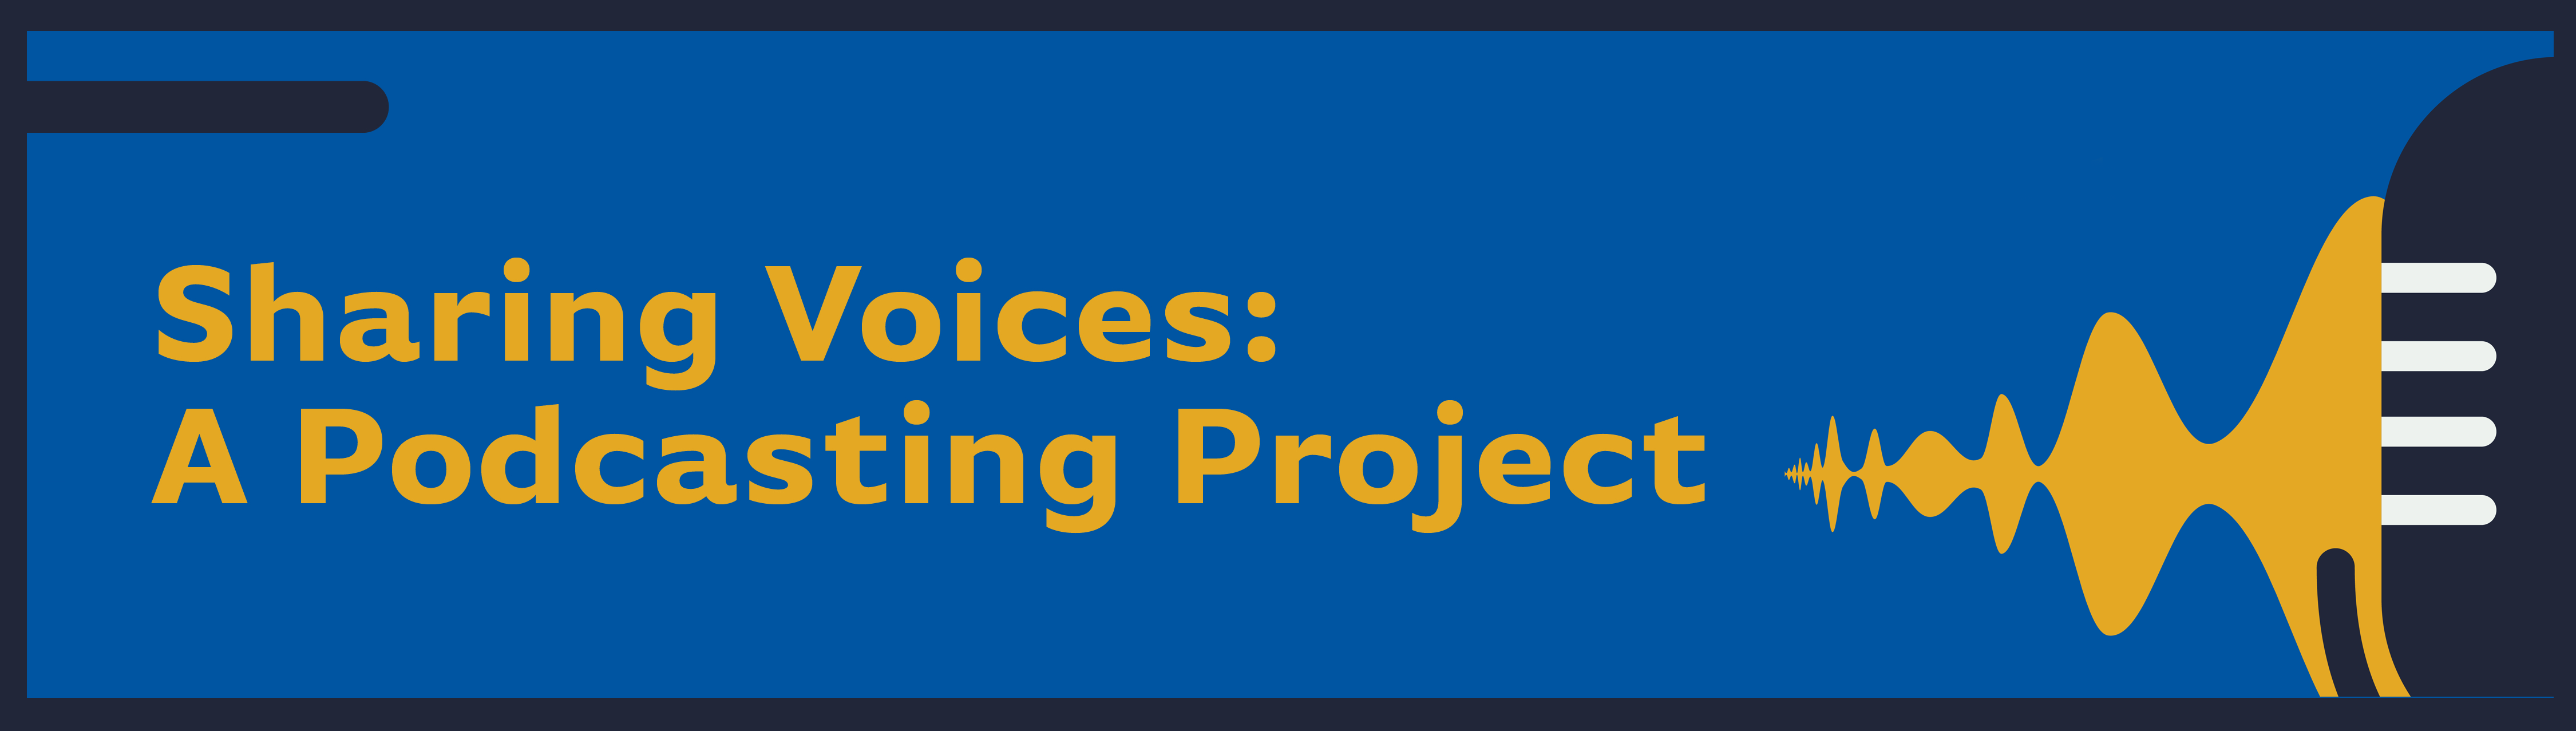 Adobe Podcast Project banner